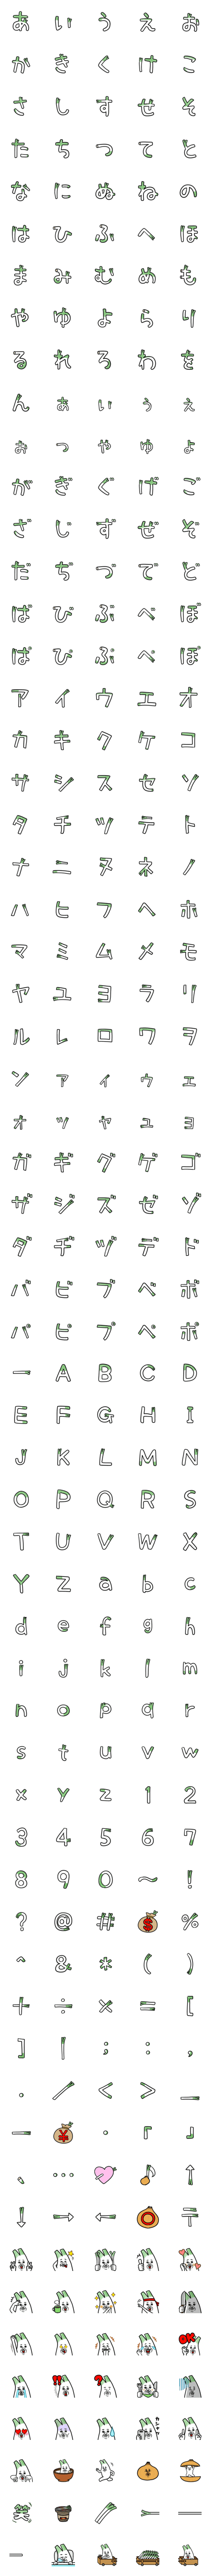 [LINE絵文字]ネギ文字の画像一覧